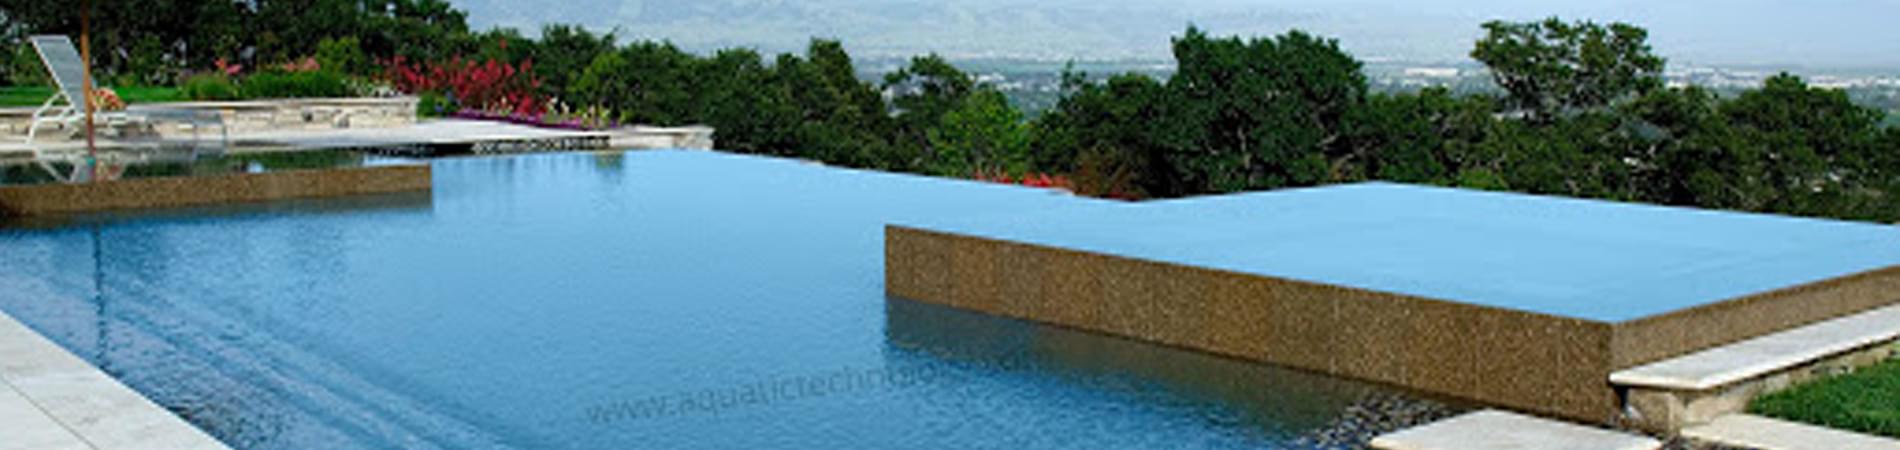 Complete Swimming Pool Construction Services California